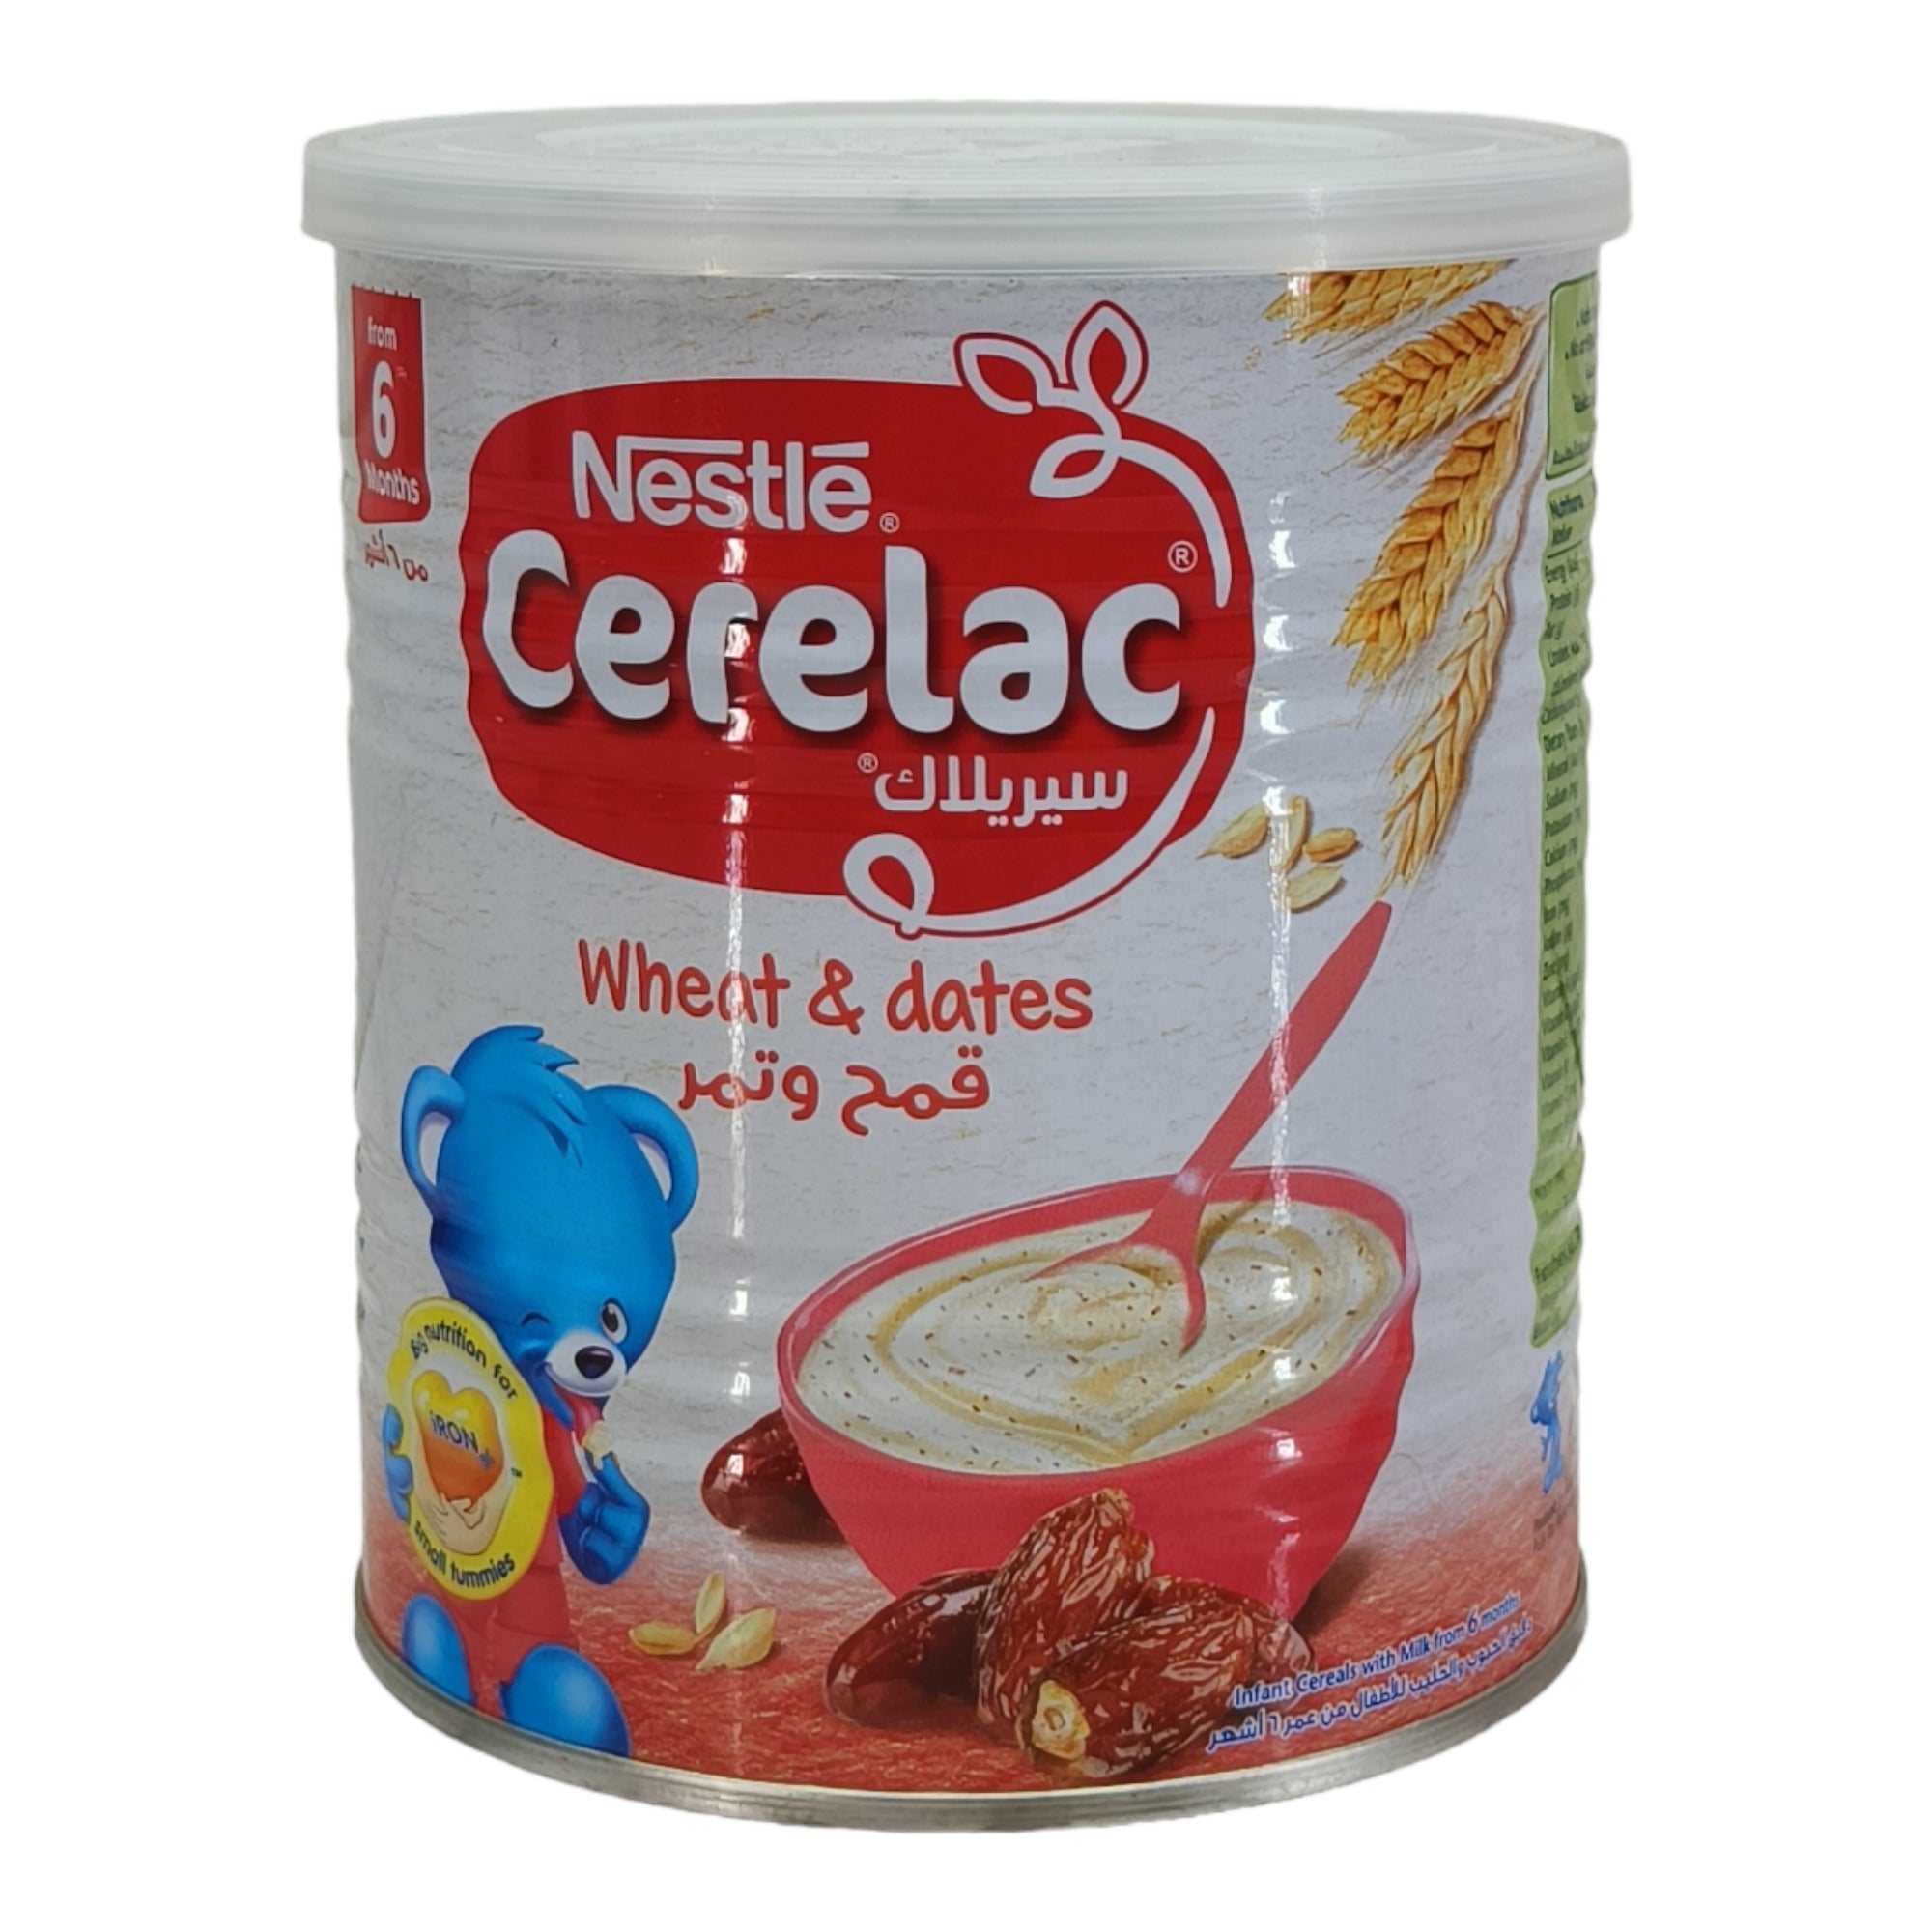 Nestle Cerelac Wheat & Dates - 400g (Imported)